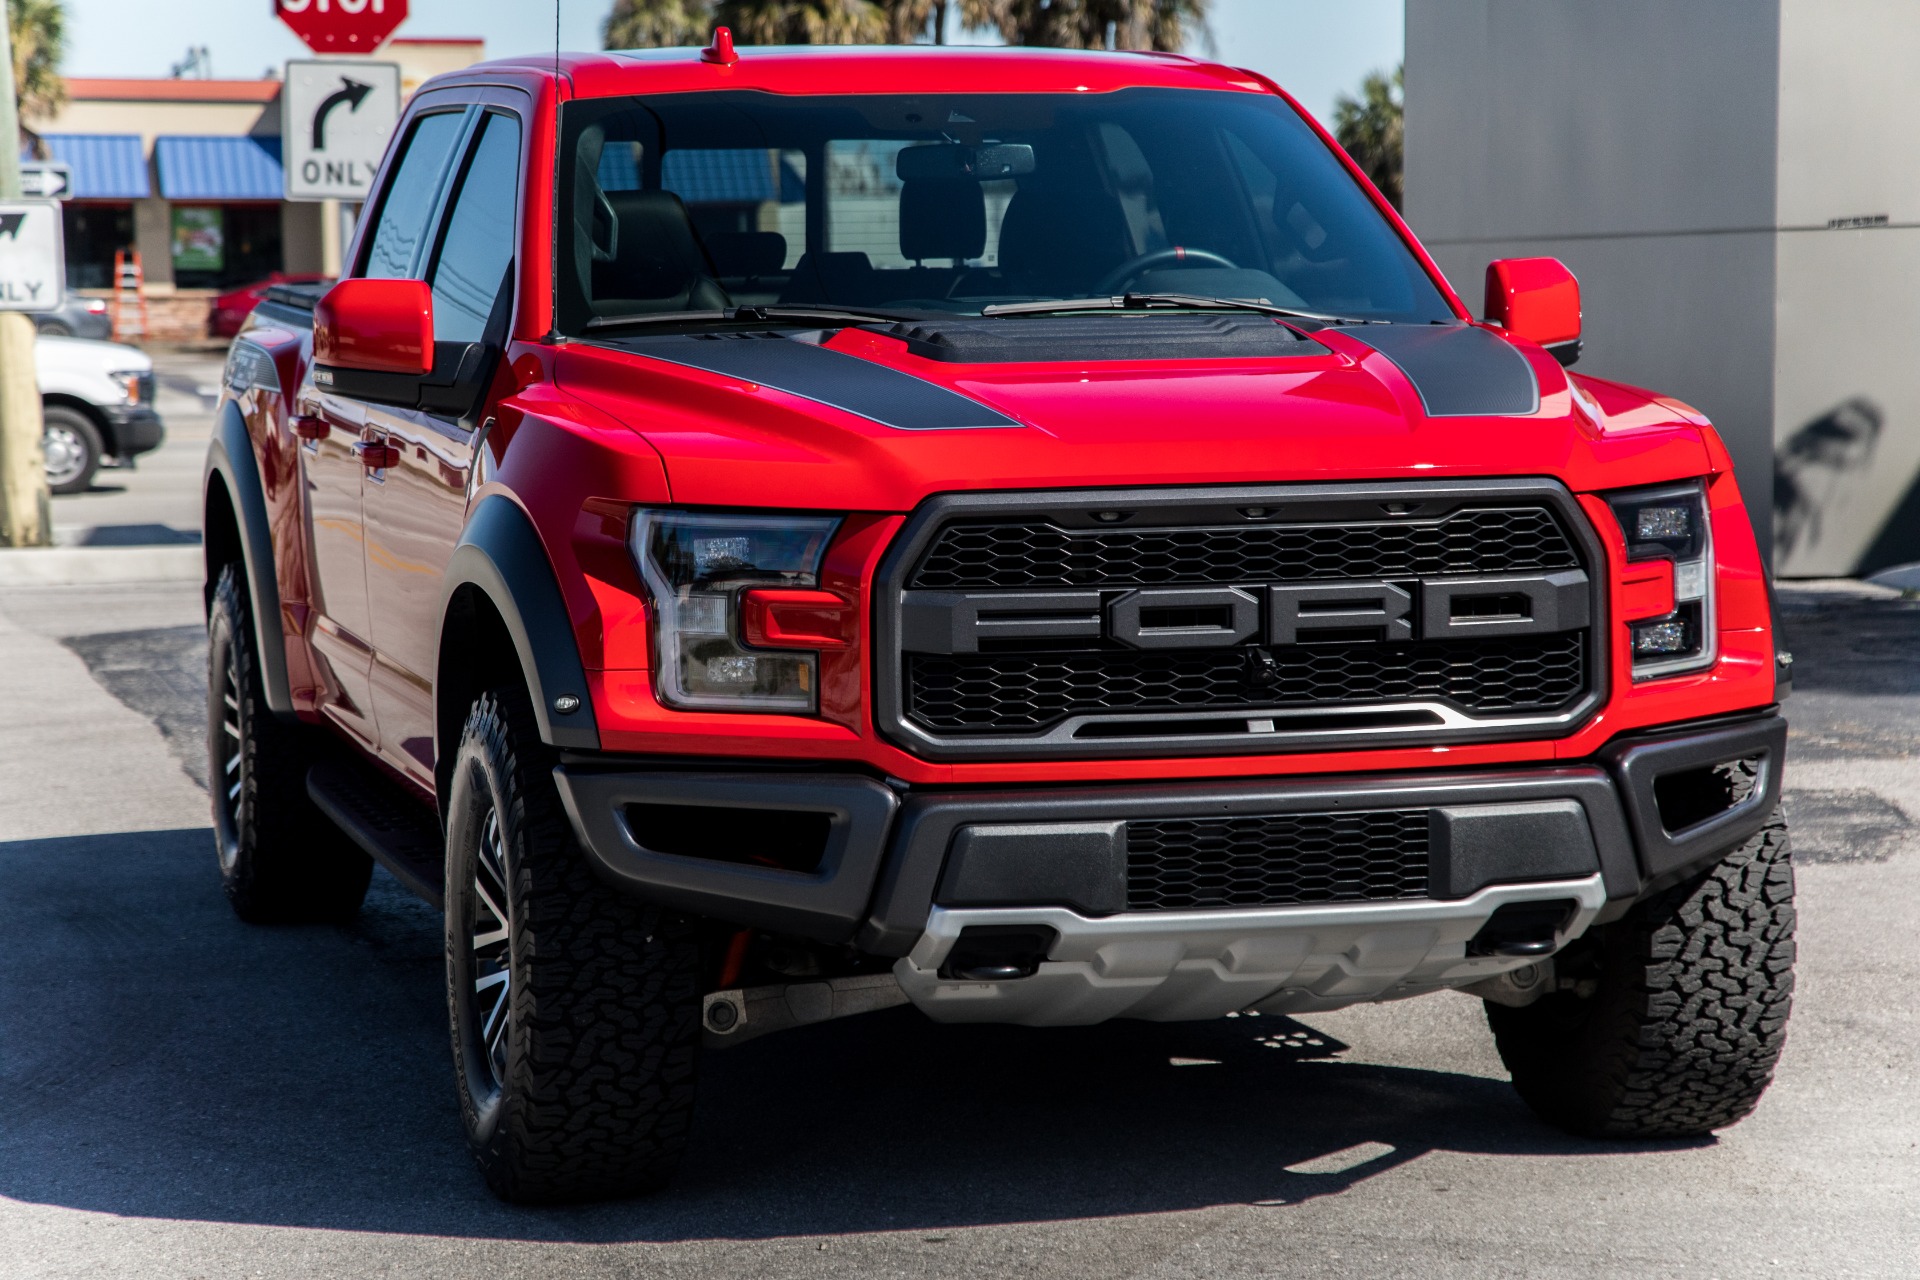 Used 2019 Ford F 150 Raptor For Sale 66900 Marino Performance